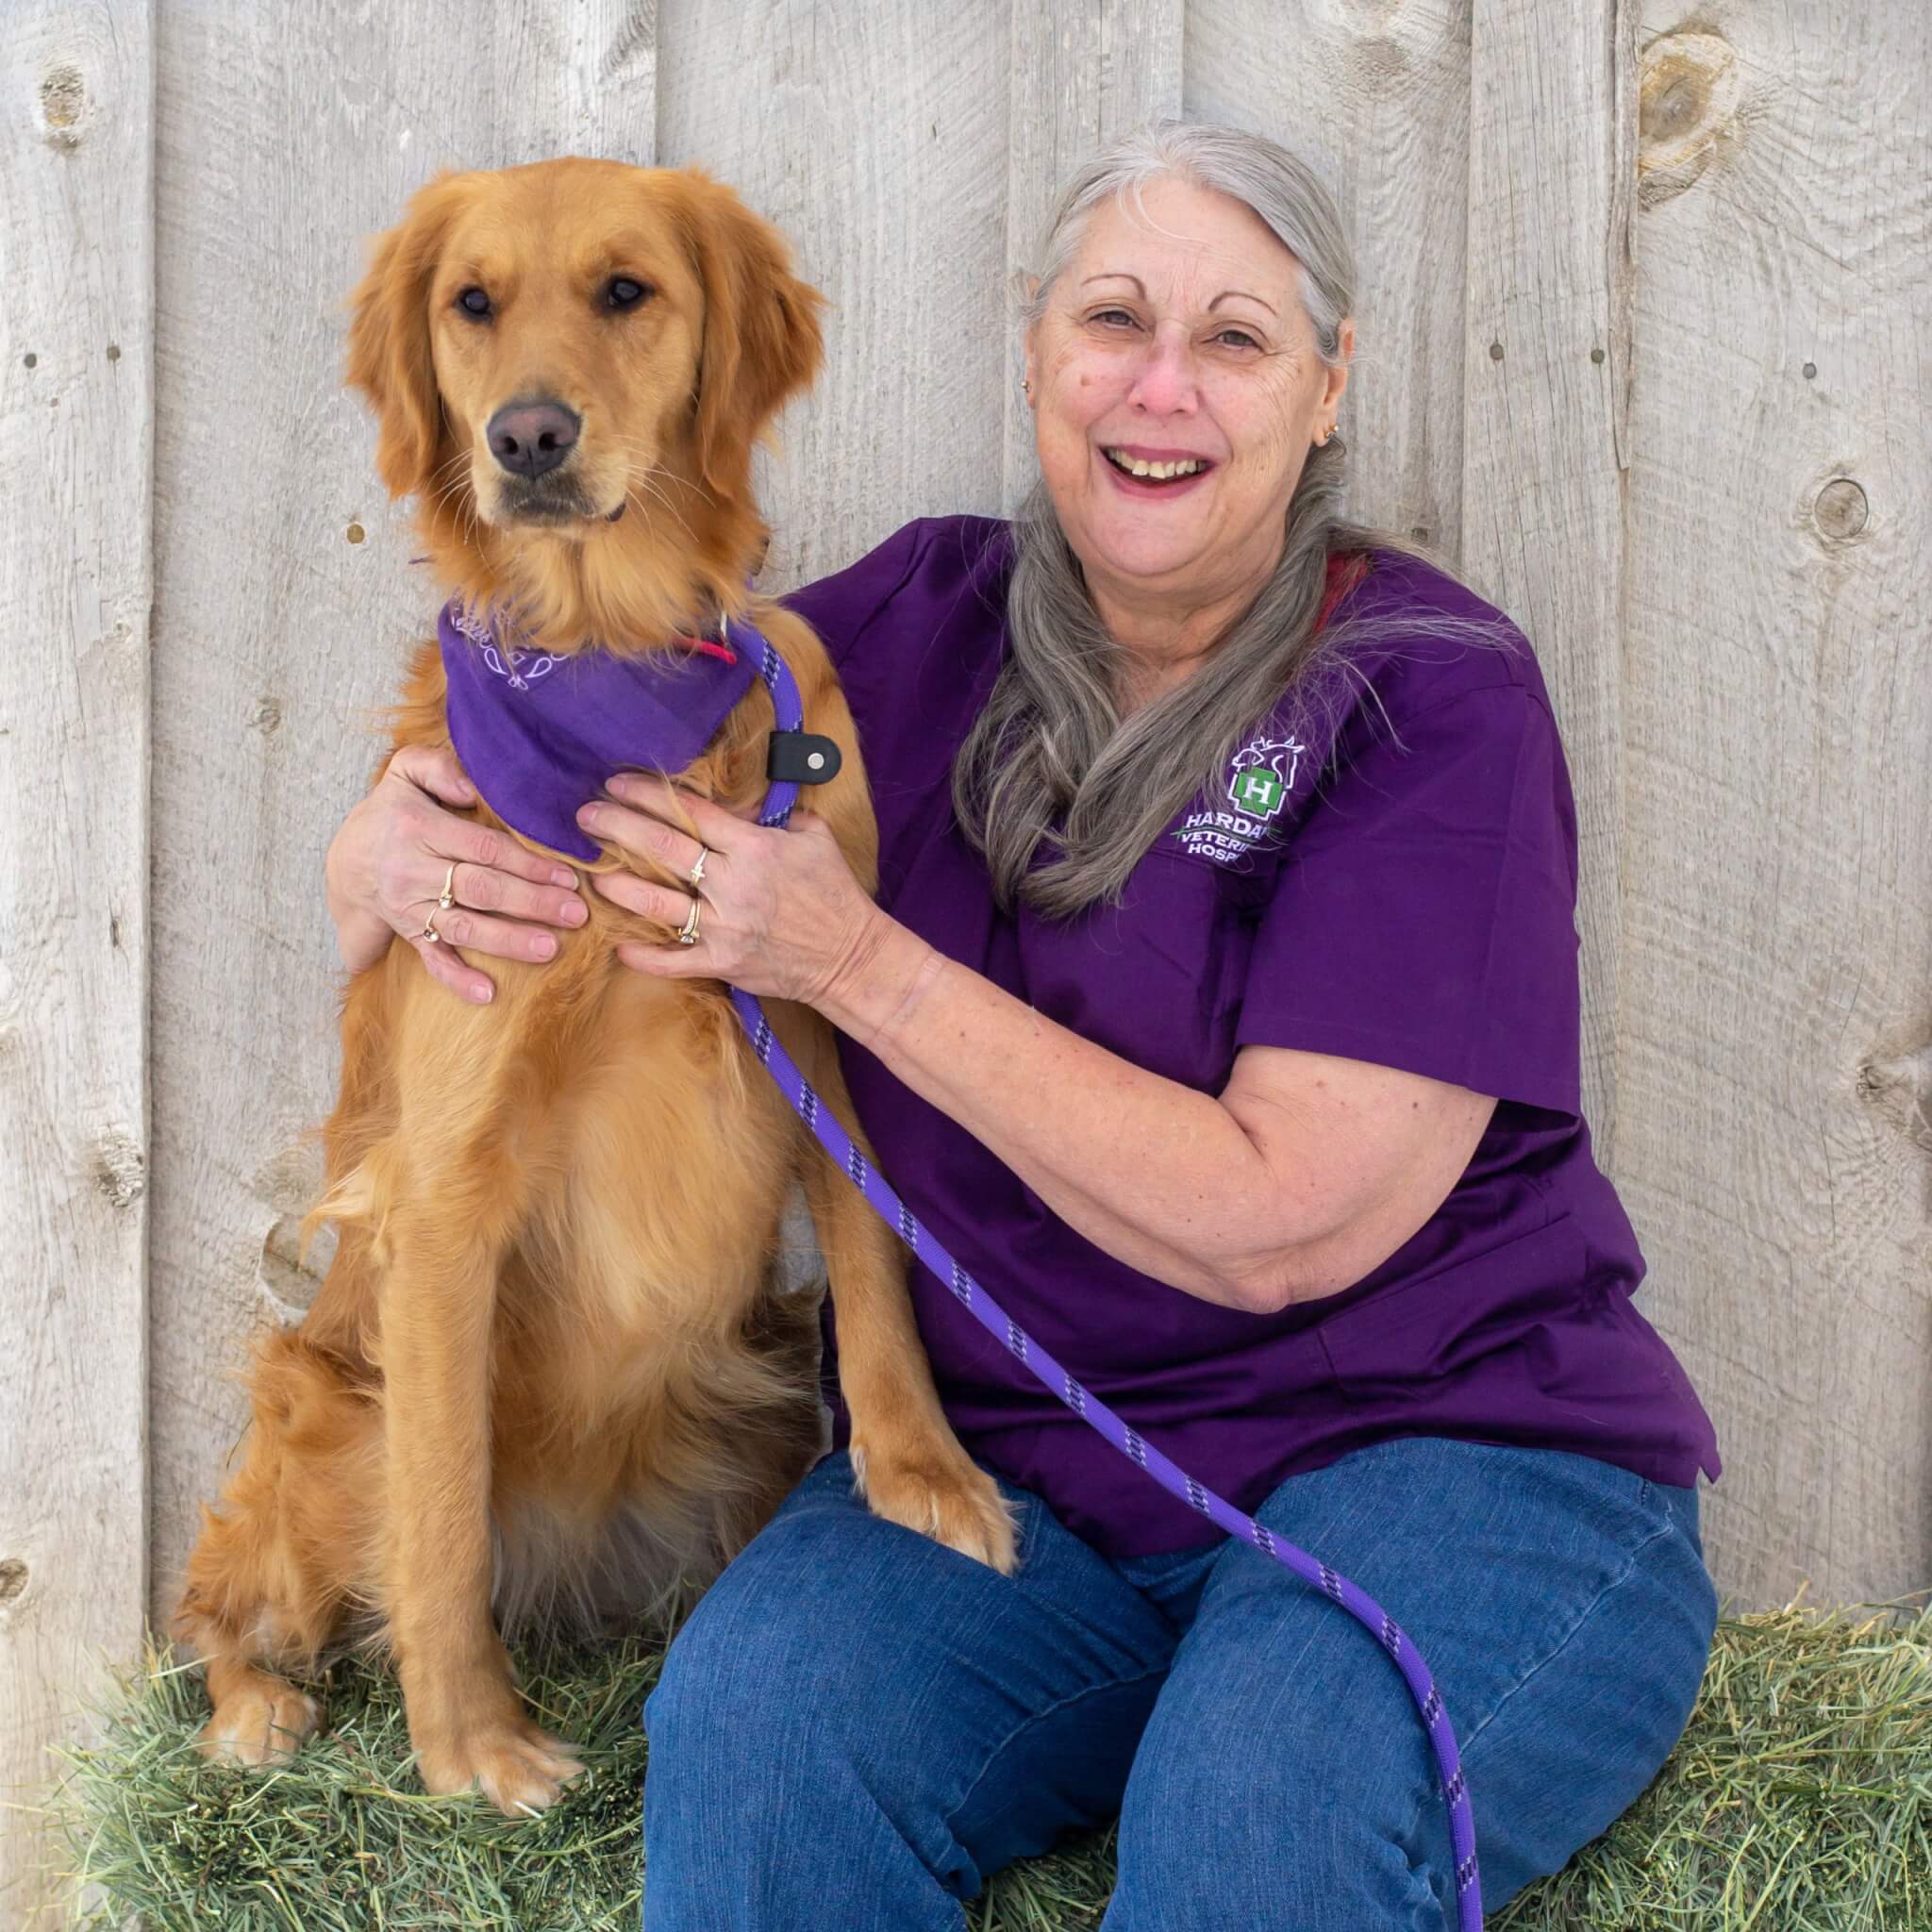 Animal Care Manager with dog